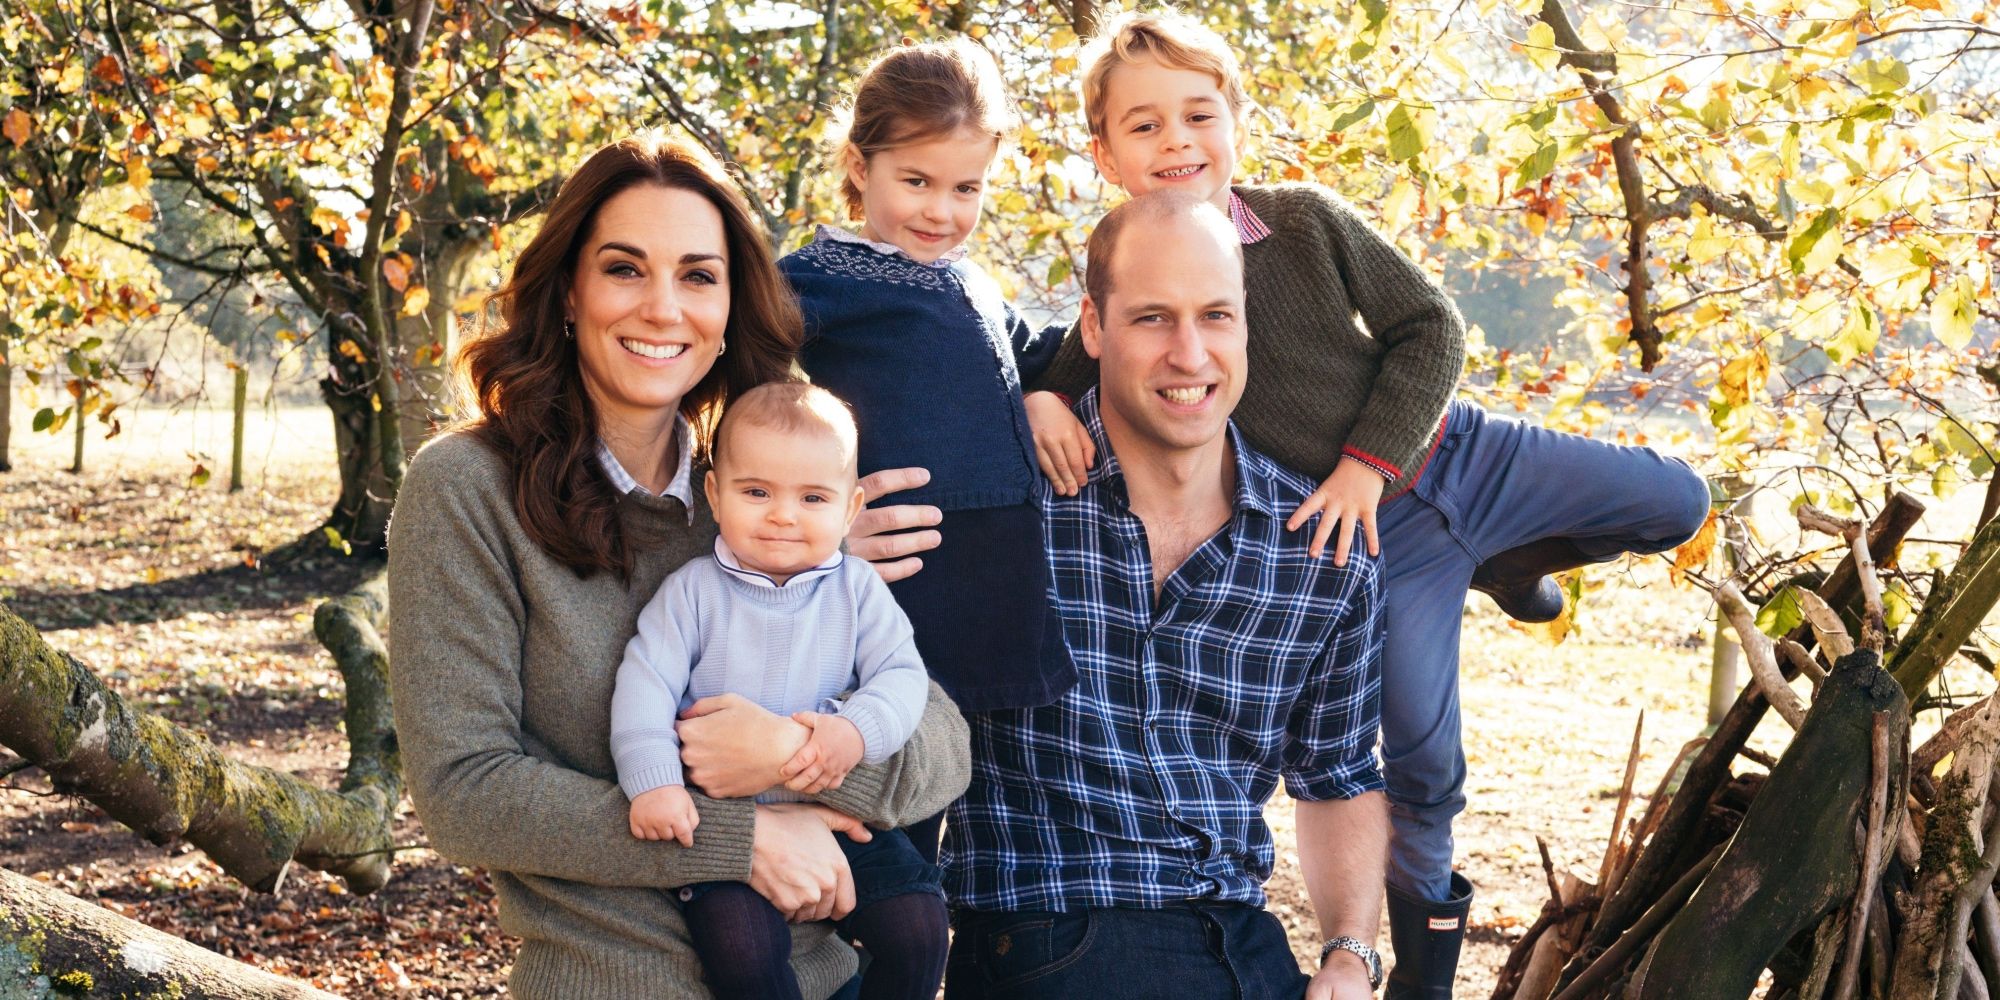 Prince William, Kate Middleton, and Prince George, Princess Charlotte, and Prince Louis